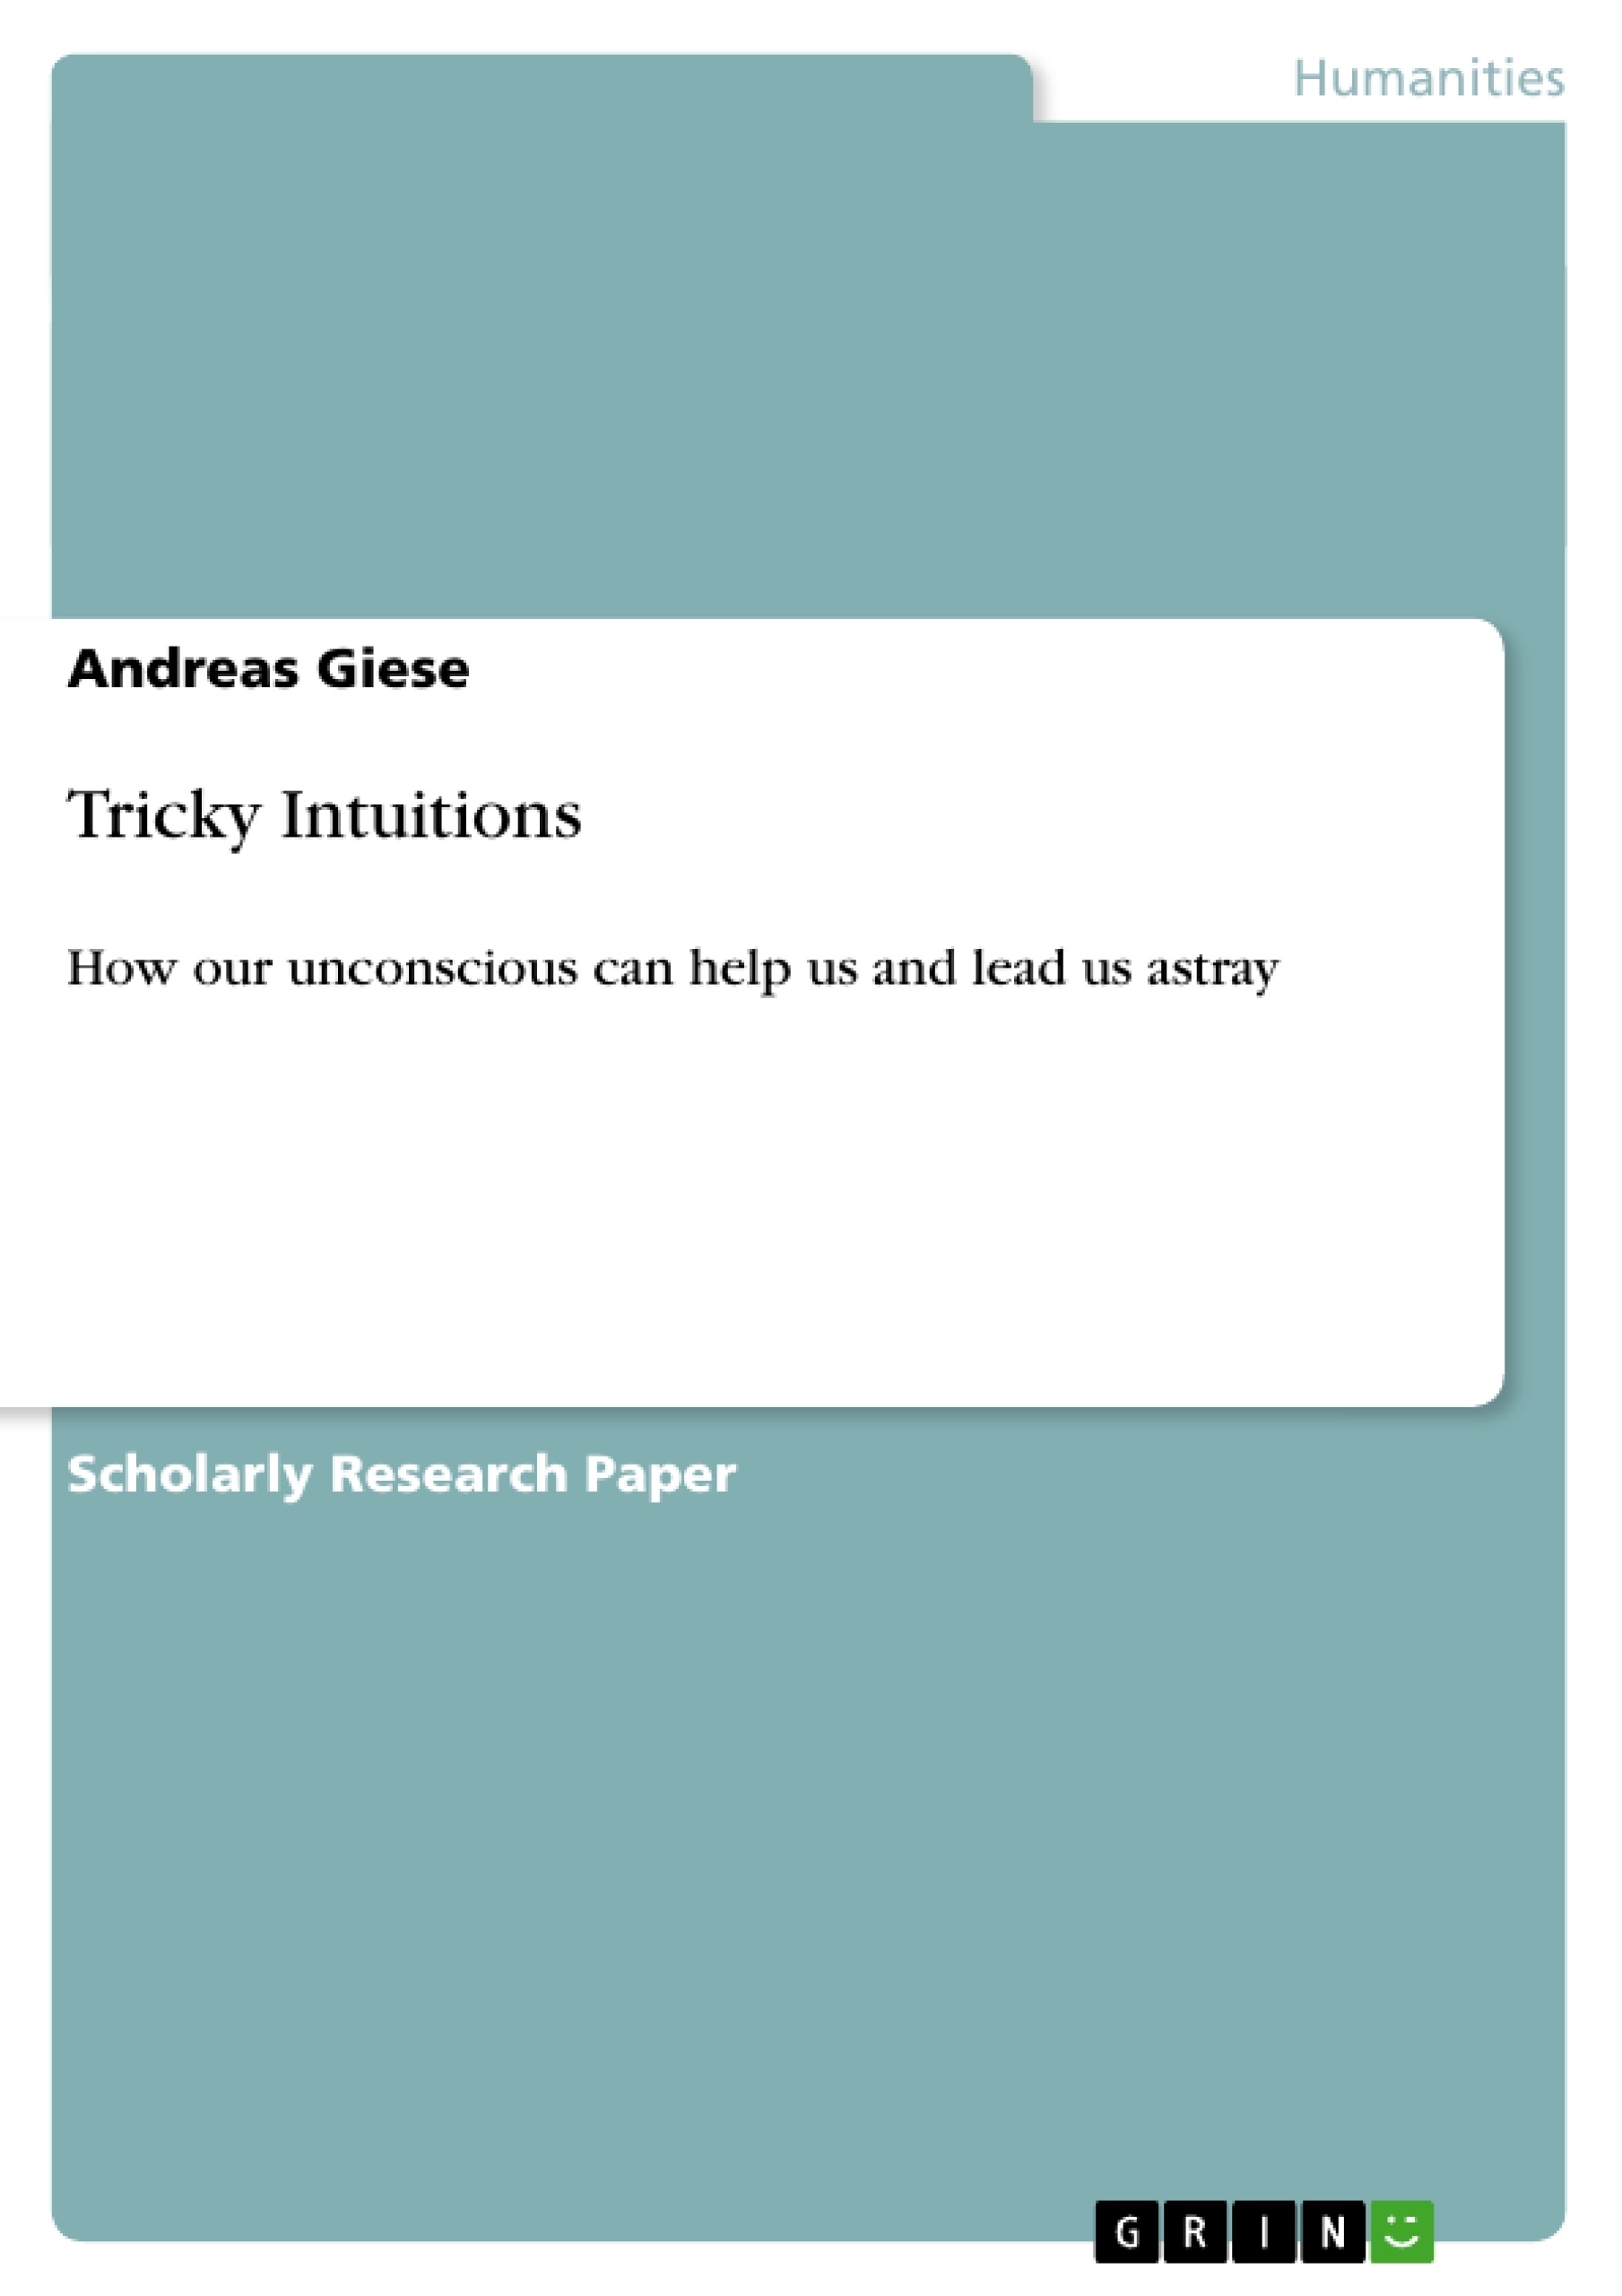 Title: Tricky Intuitions